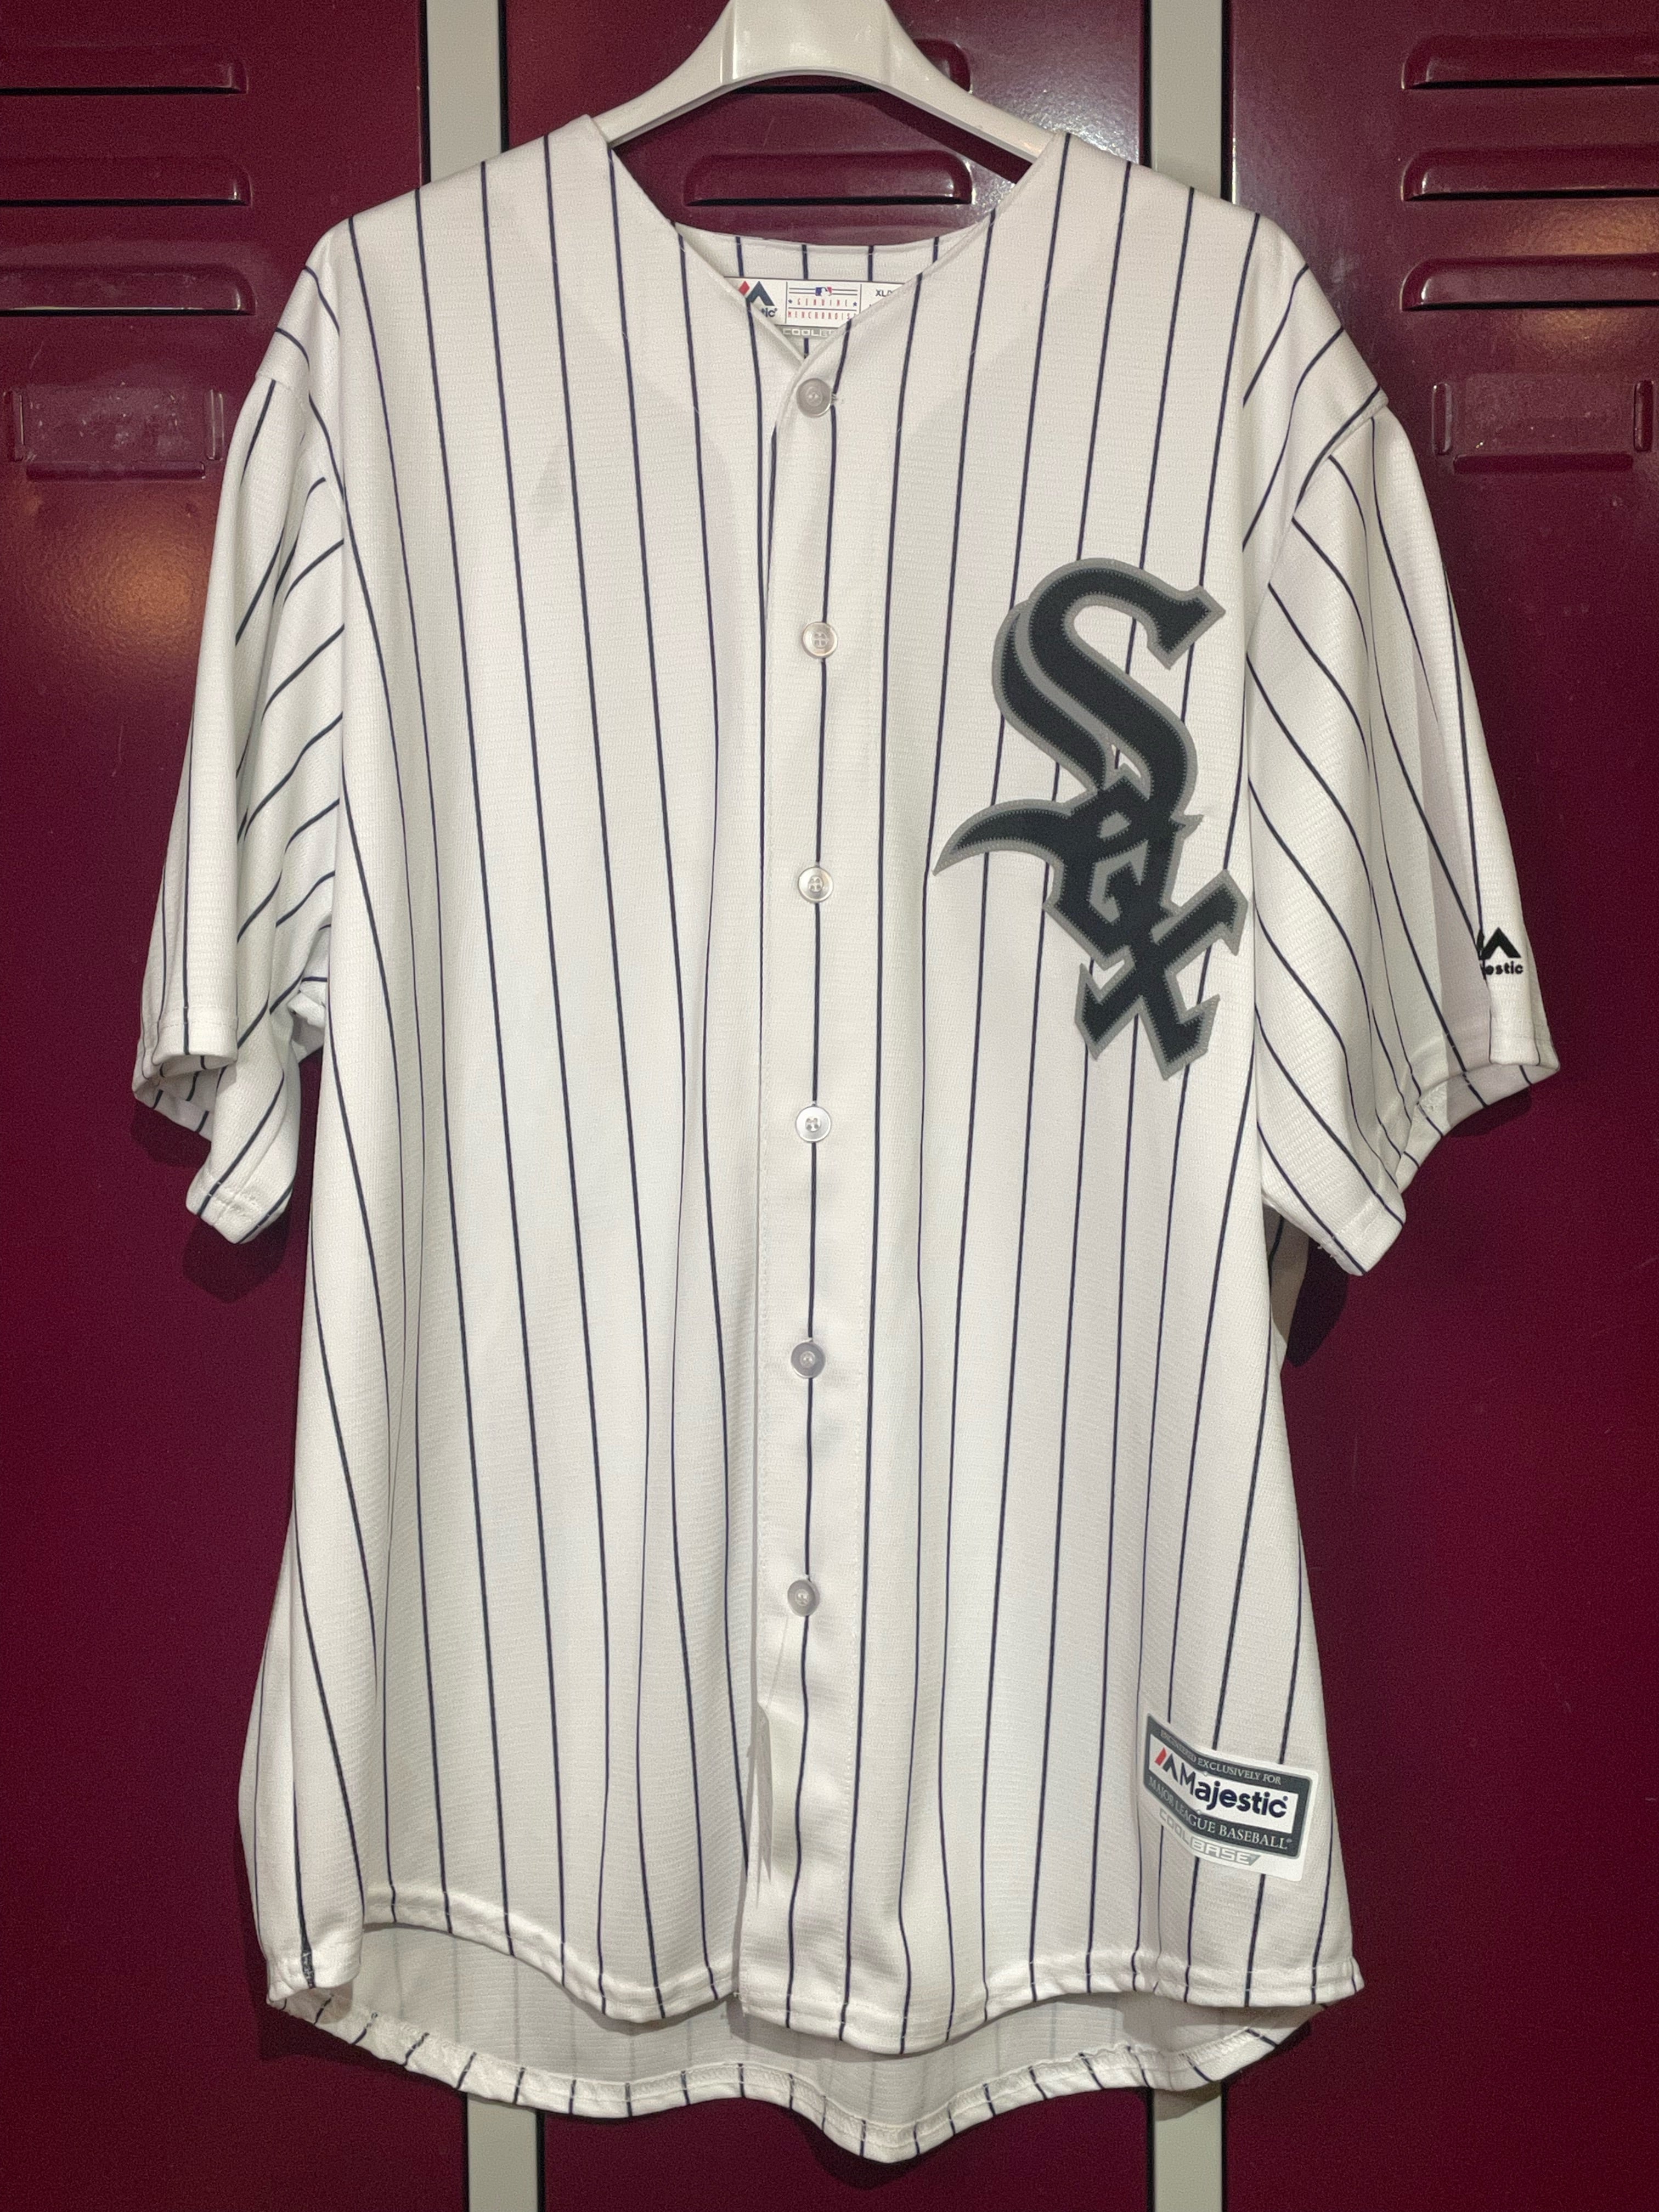 chicago white sox jersey youth